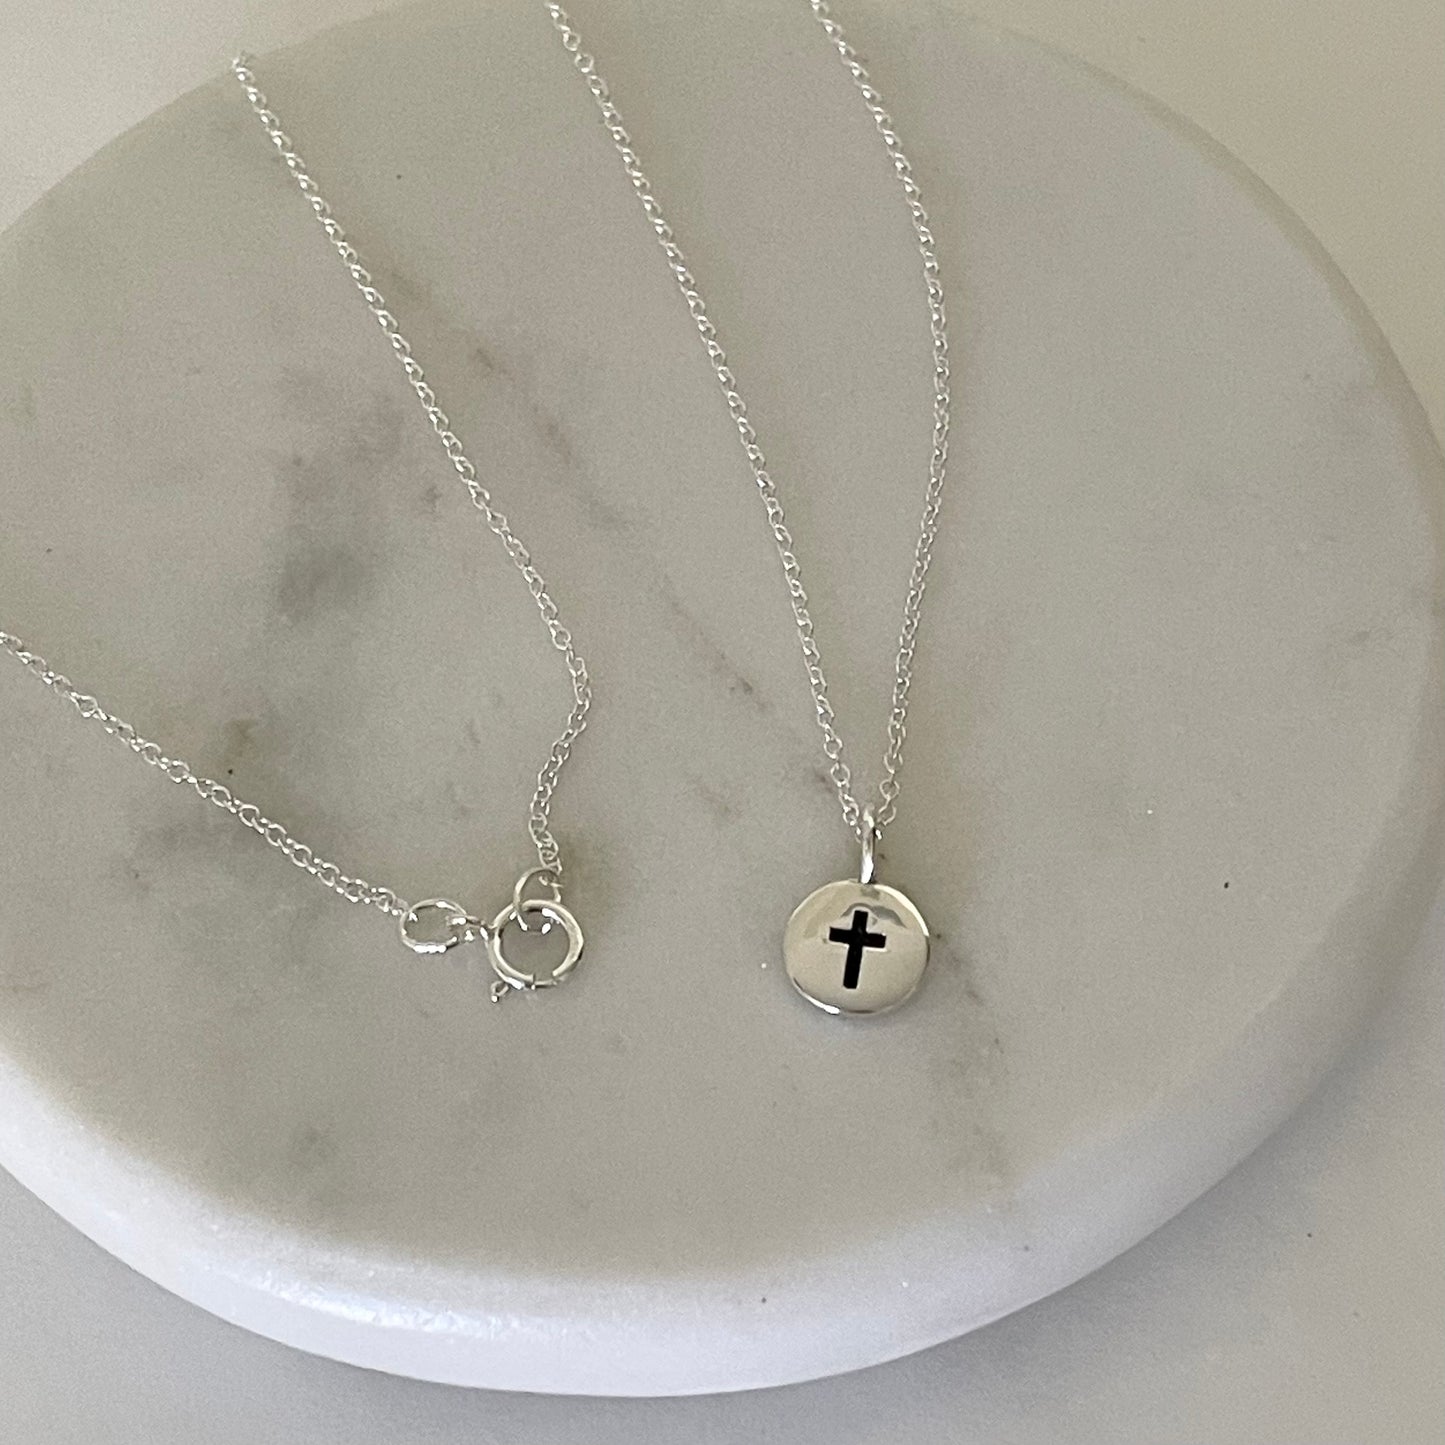 Cross Icon Necklace